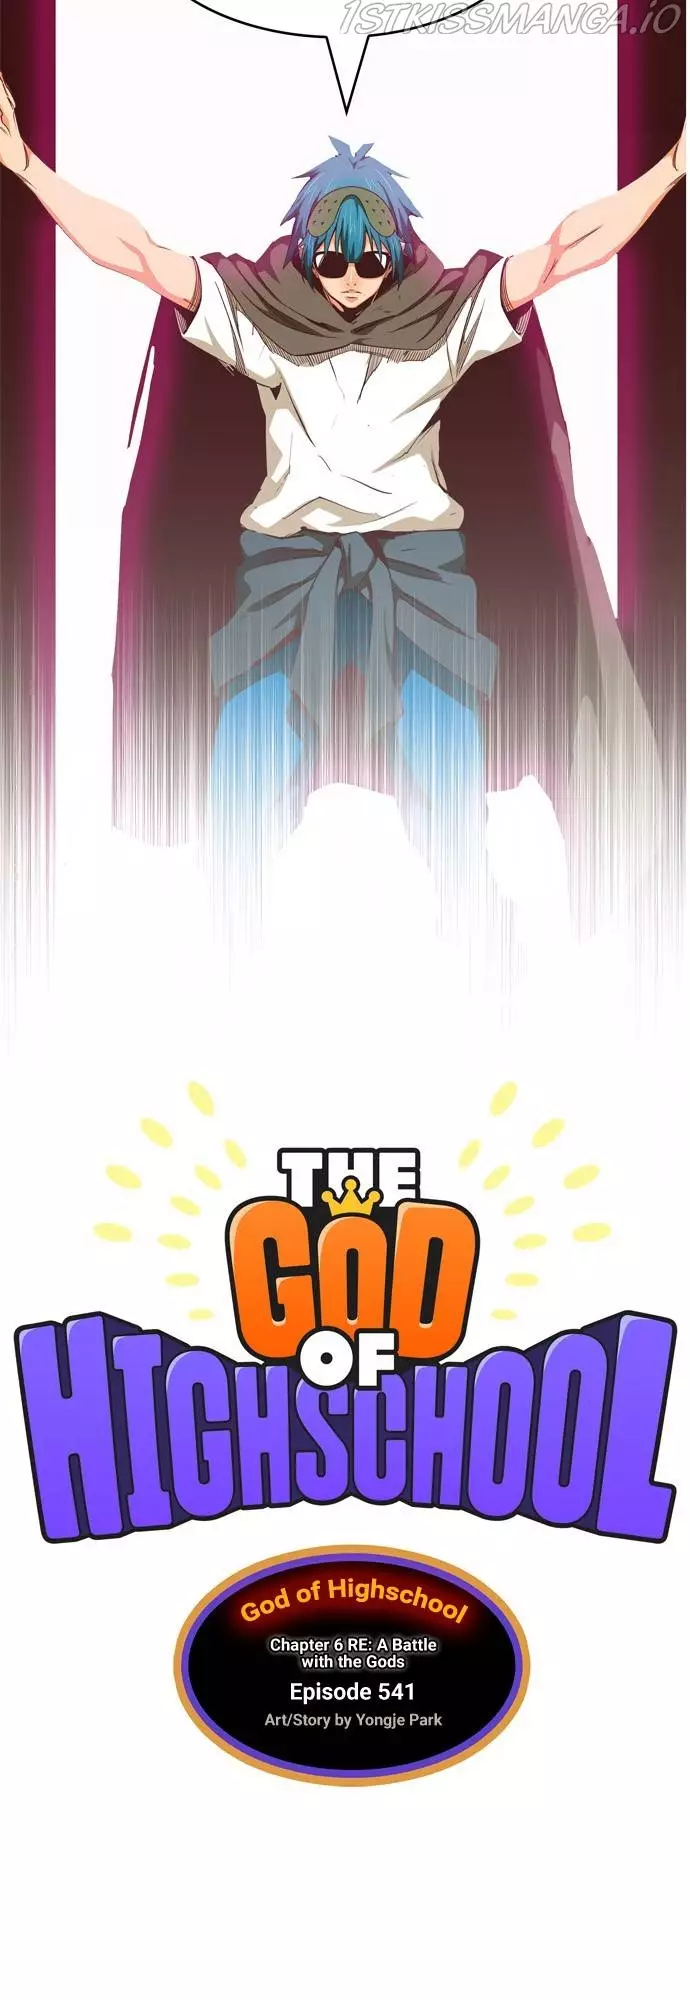 The God Of High School - 541 page 17-3c4b6091